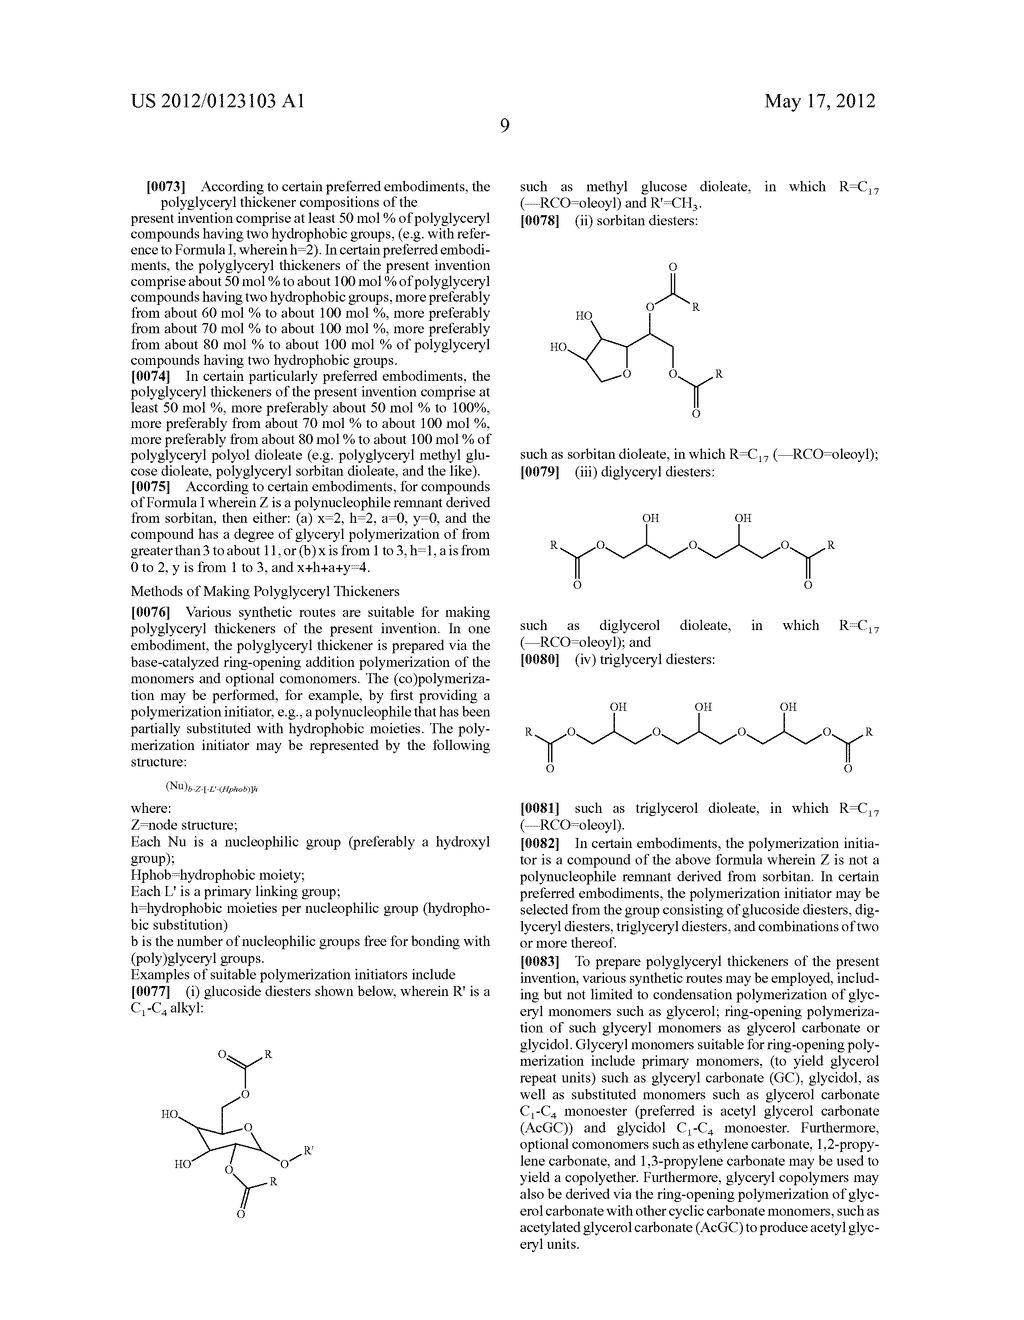 POLYGLYCERYL COMPOUNDS AND COMPOSITIONS - diagram, schematic, and image 14